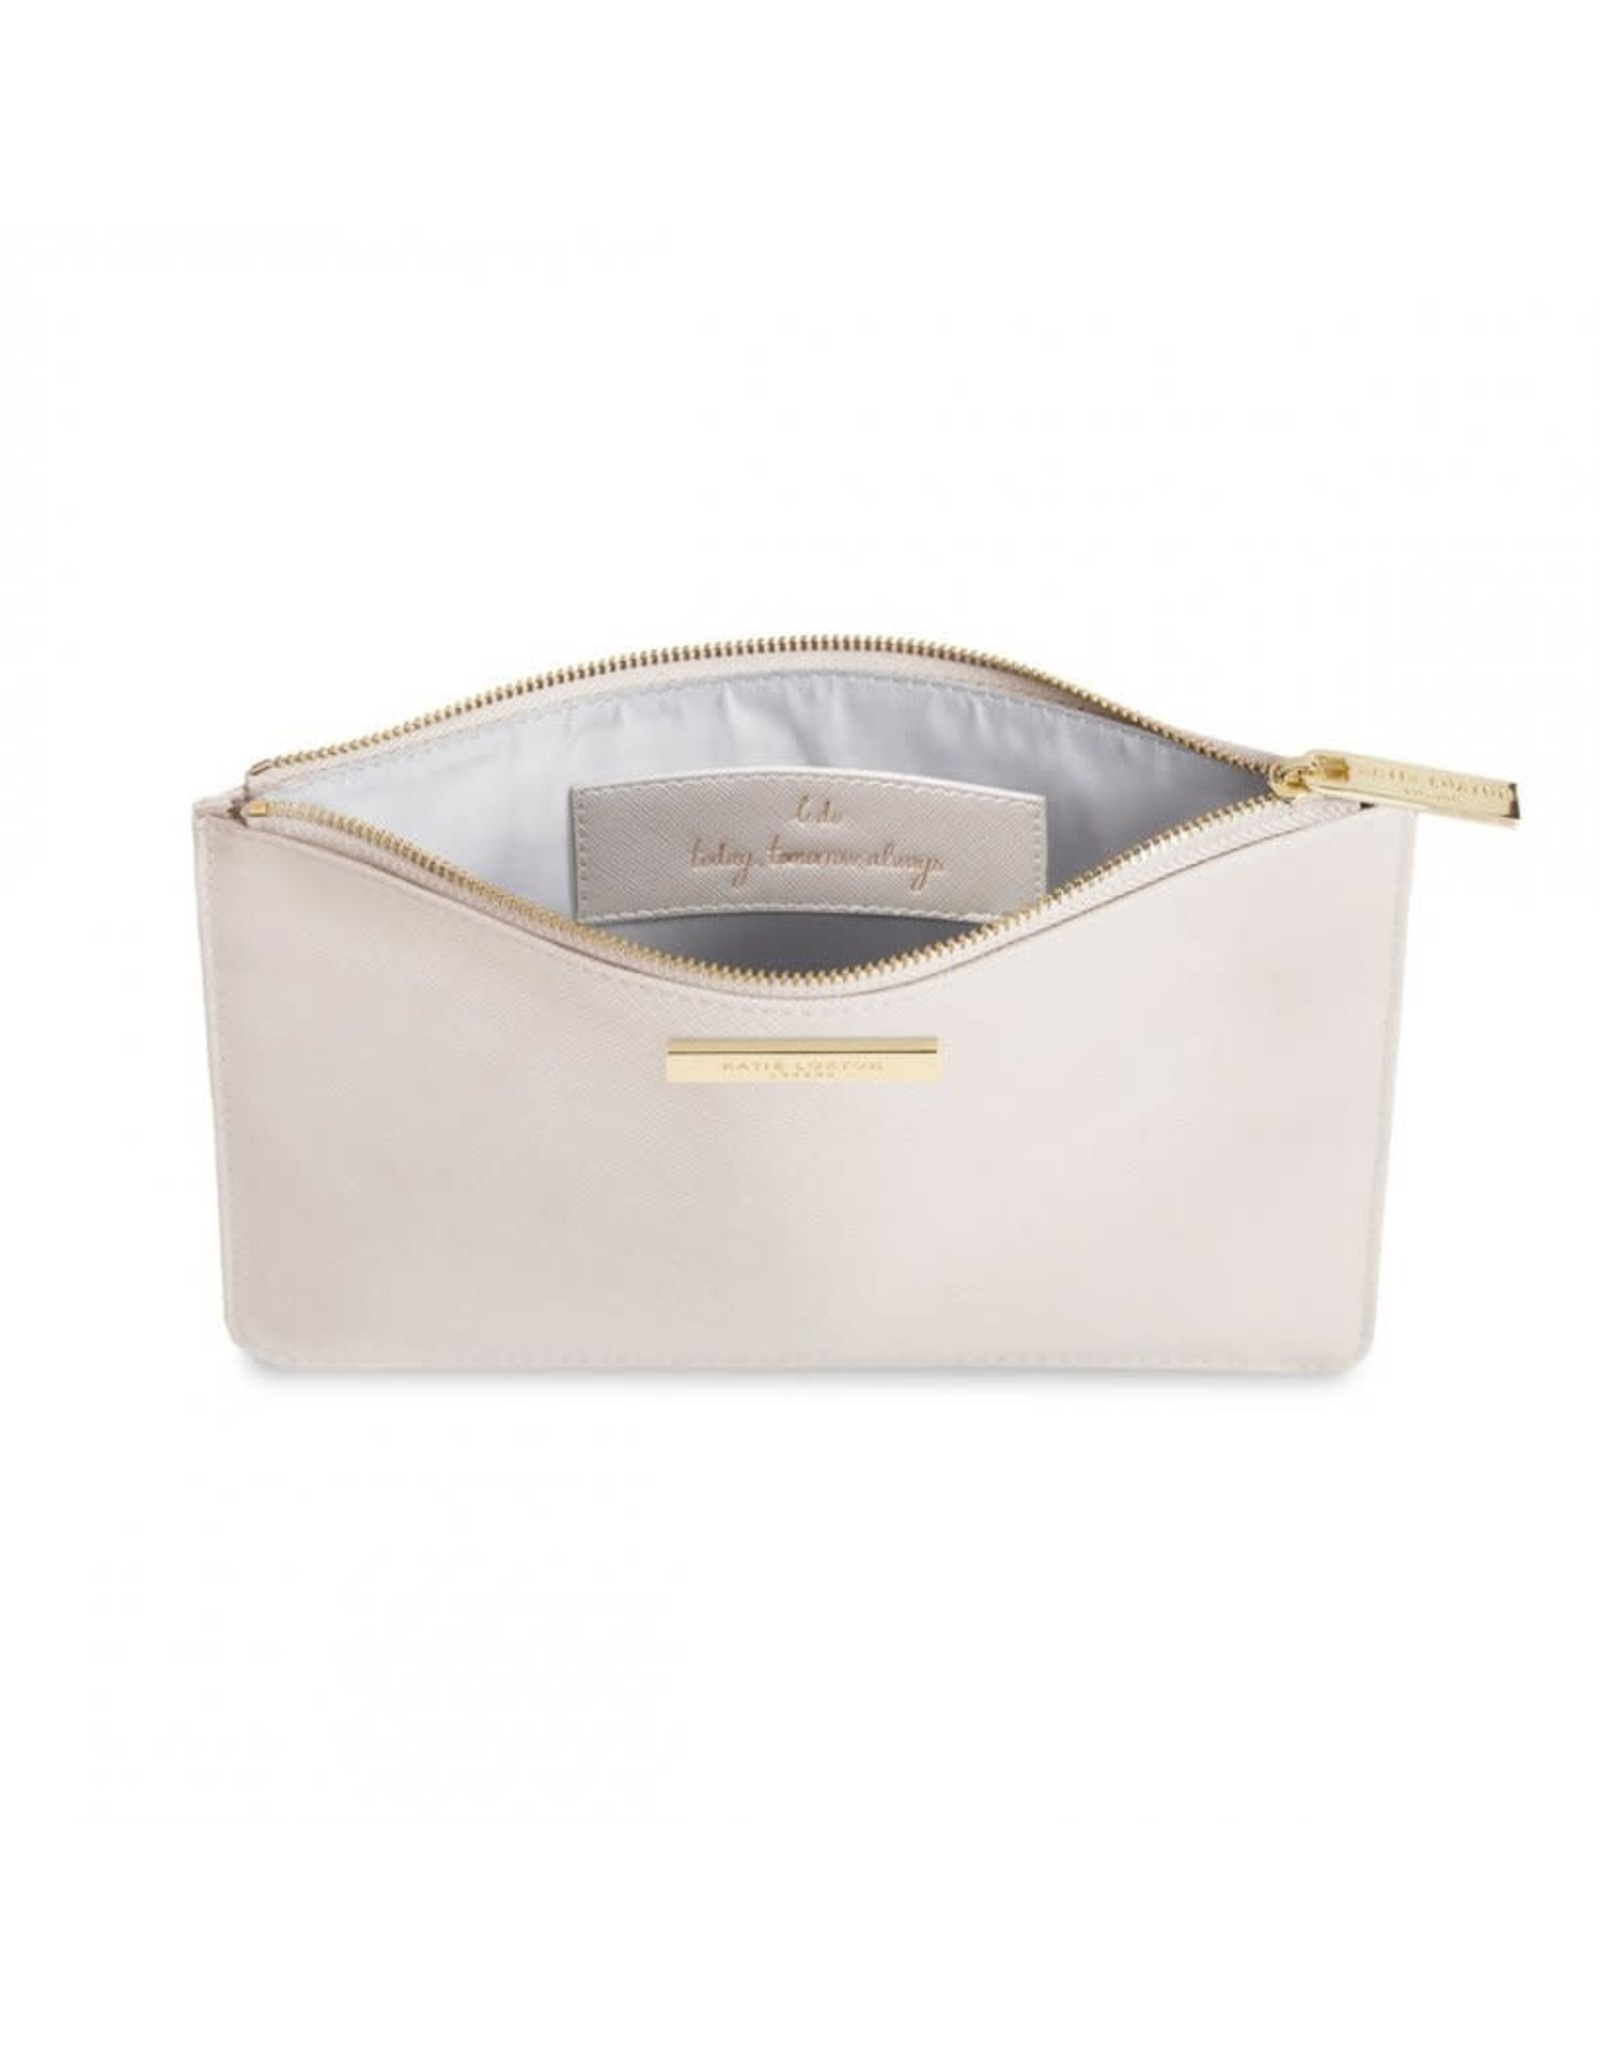 KATIE LOXTON PERF POUCH BRIDAL BRIDE I DO